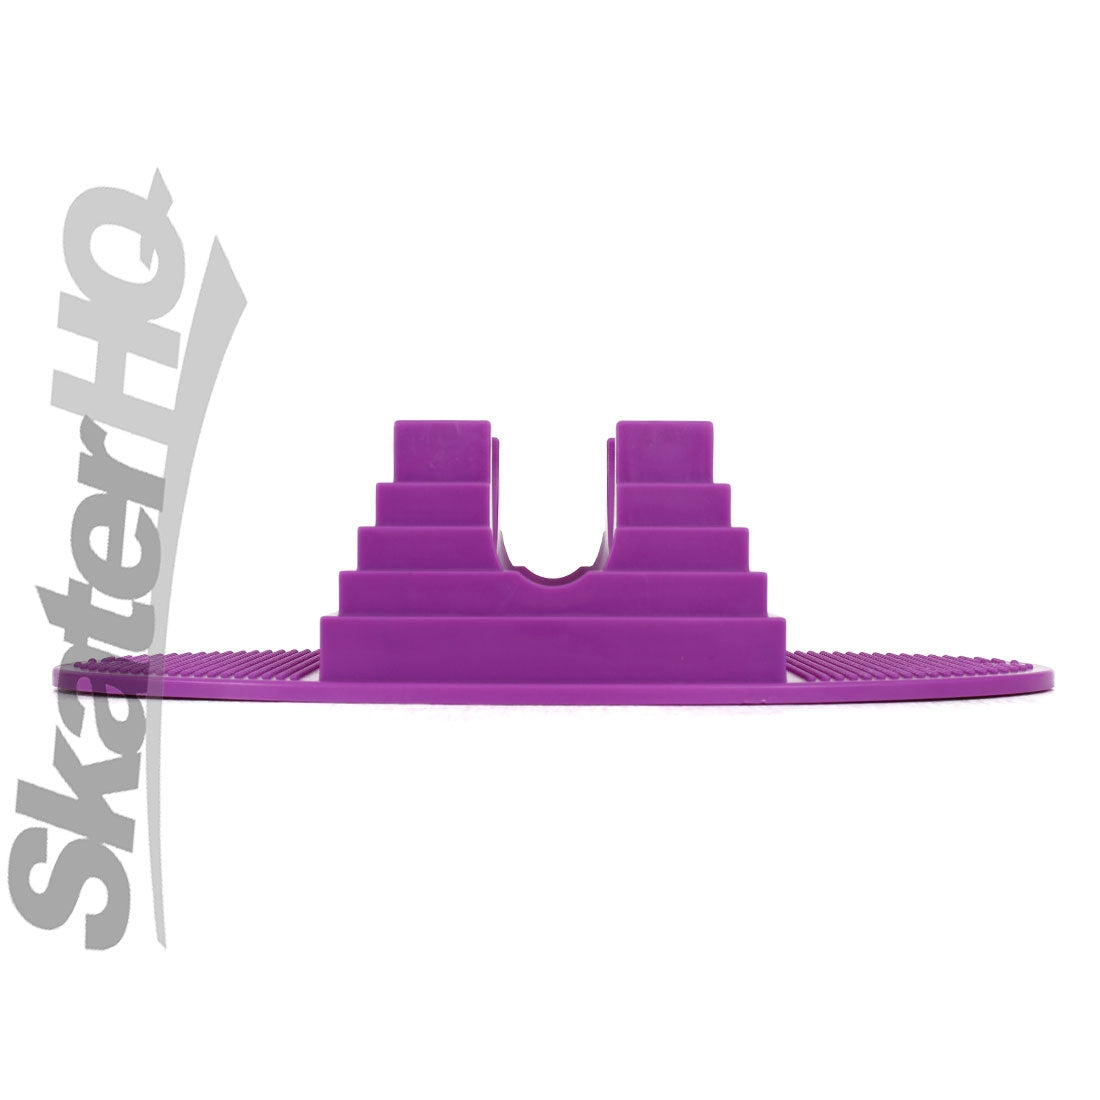 Scooter Pyramid Stand - Purple Scooter Accessories